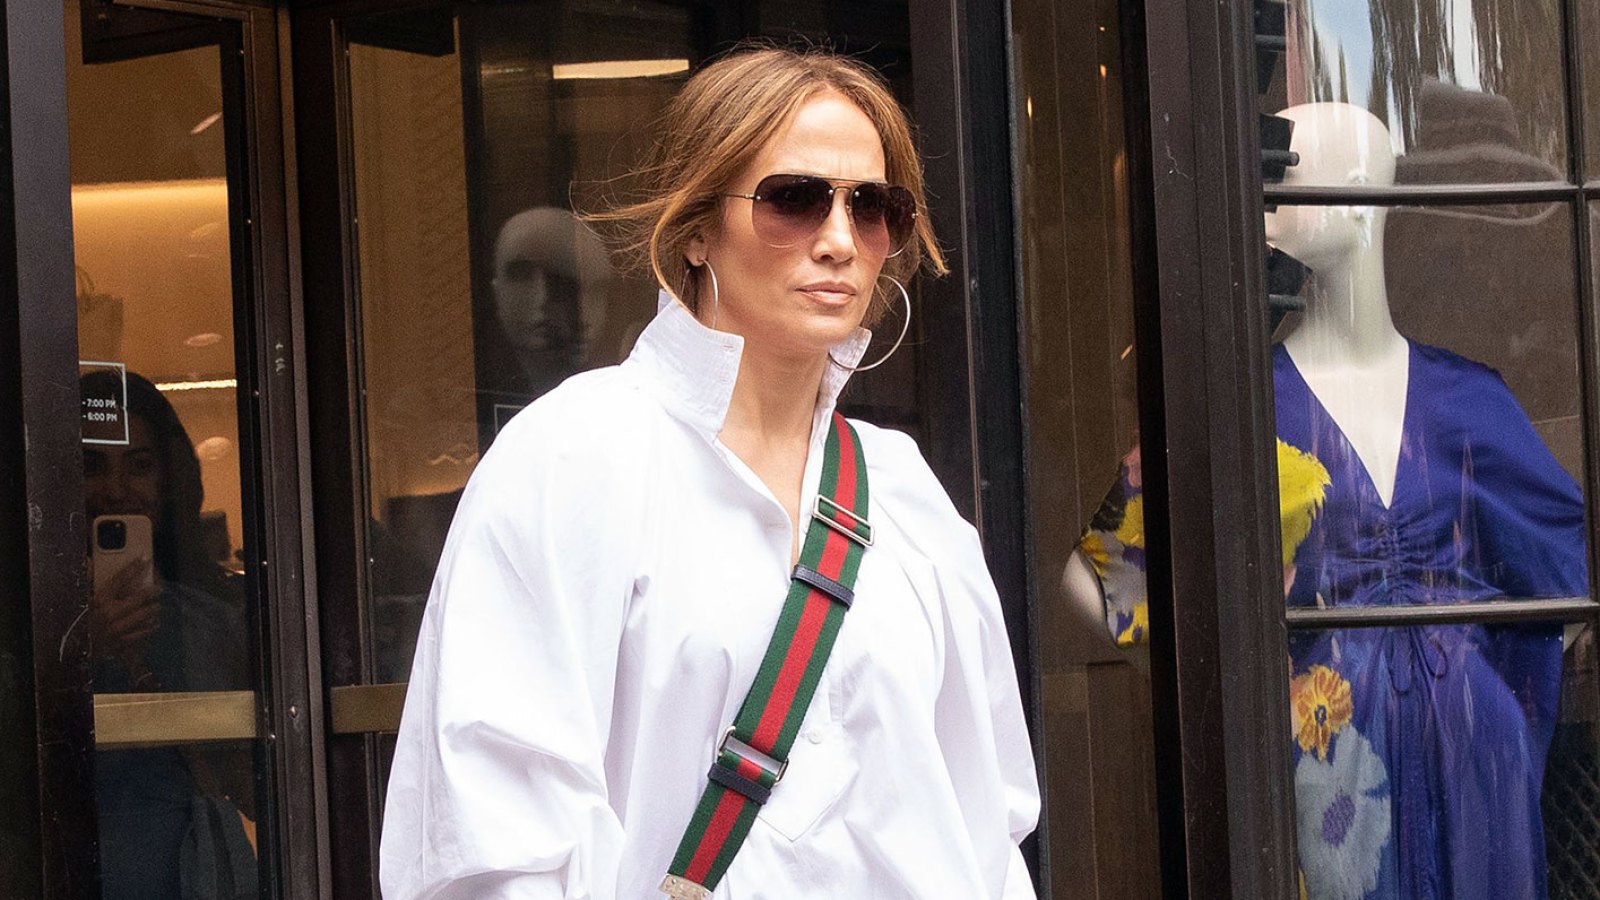 Jennifer Lopez Nails Off-Duty Style in an Oversized Button Up and Denim Shorts